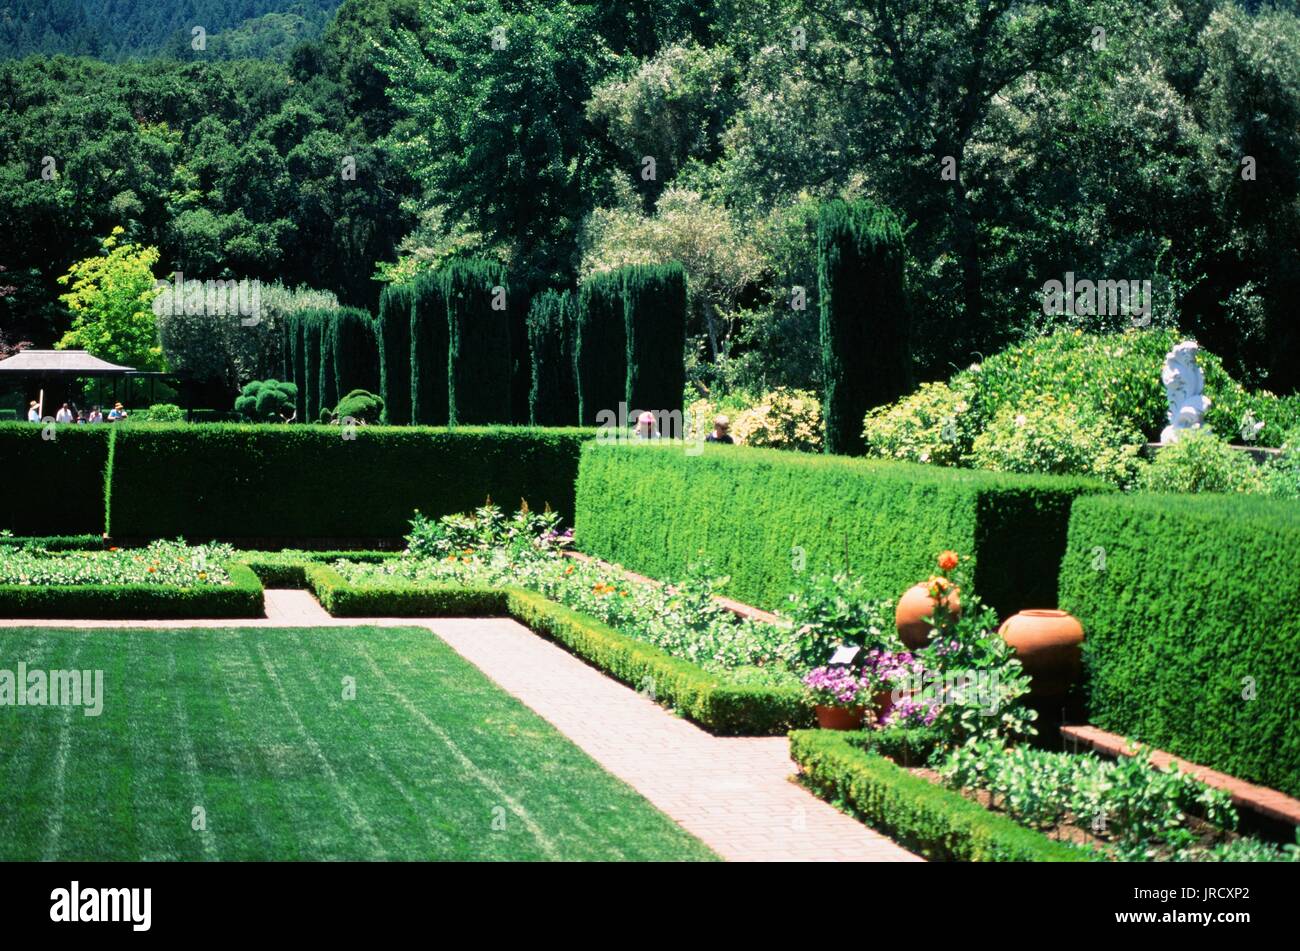 Hedgerows and other formal garden elements at Filoli Gardens, a restored Victorian style country estate and formal garden in Woodside, California, June 23, 2017. Stock Photo